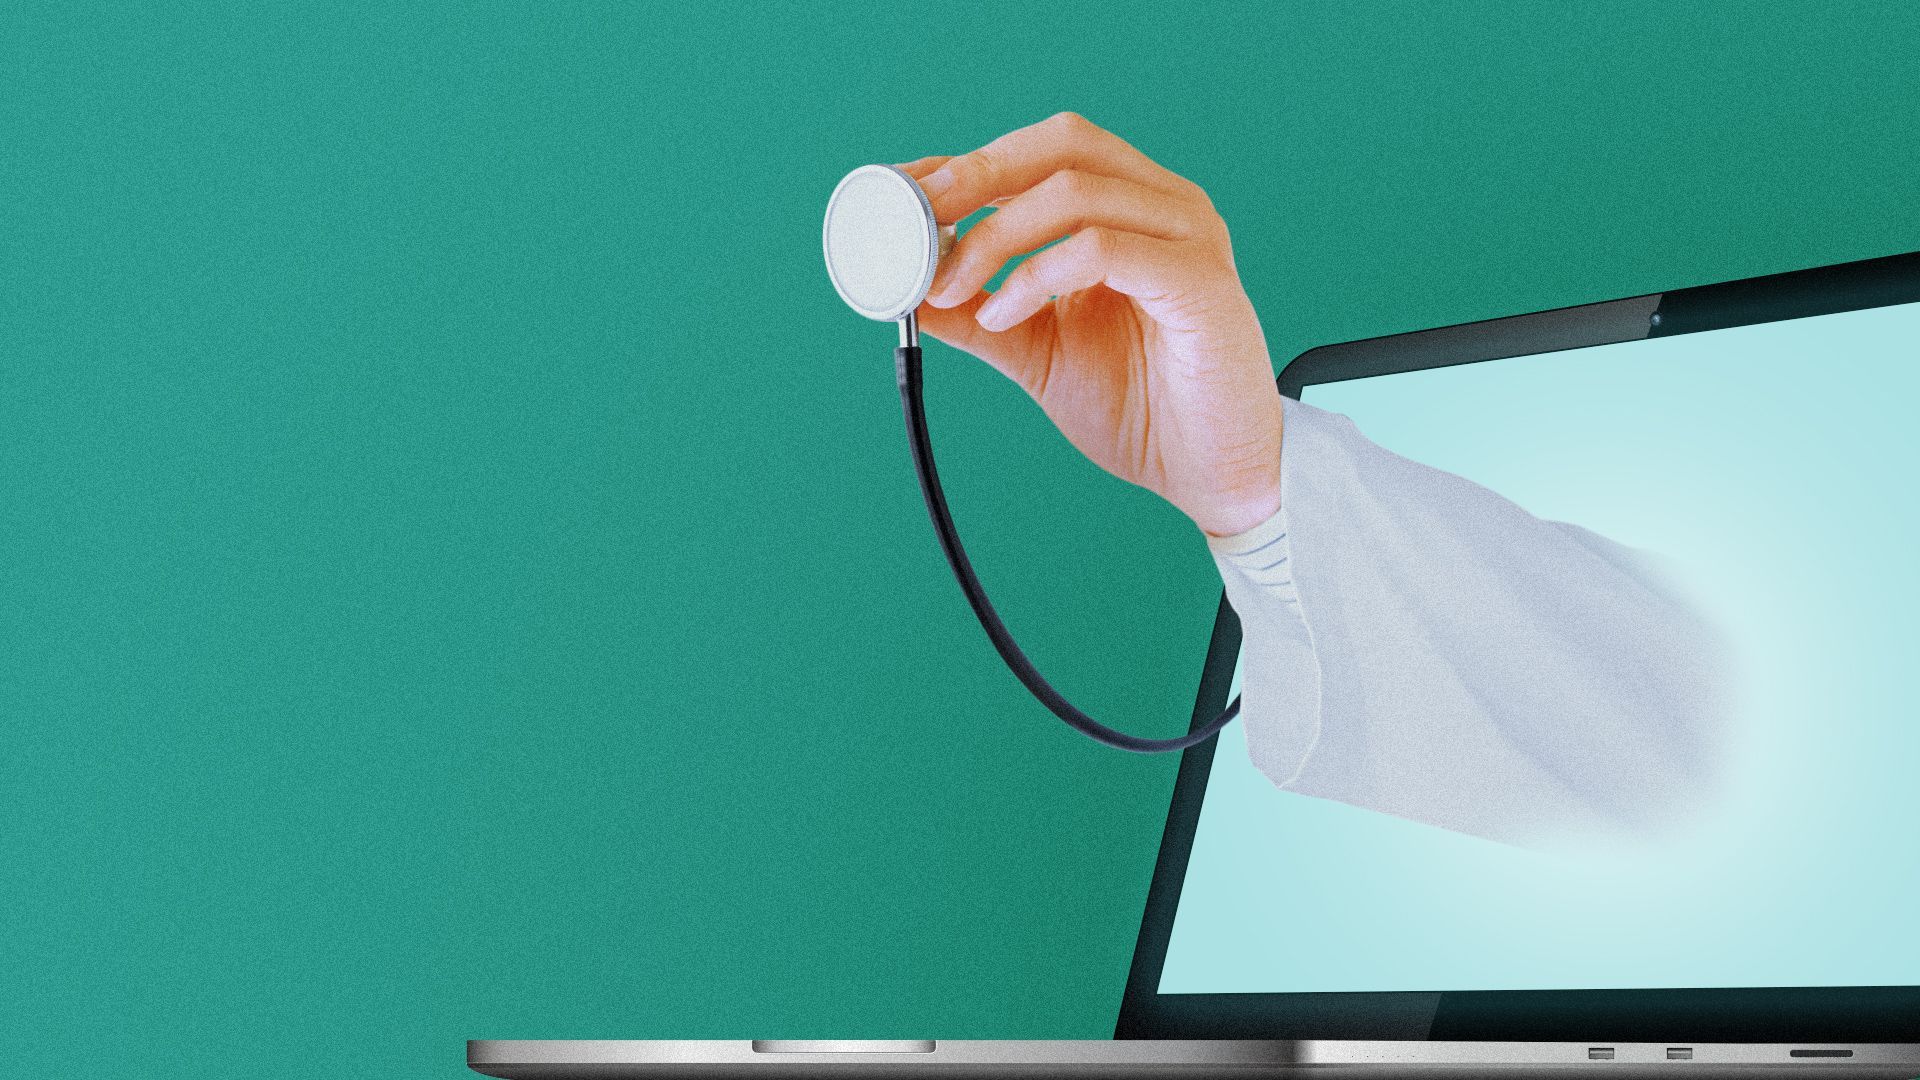 Illustration of a physician's hand holding a stethoscope coming out of a laptop screen.